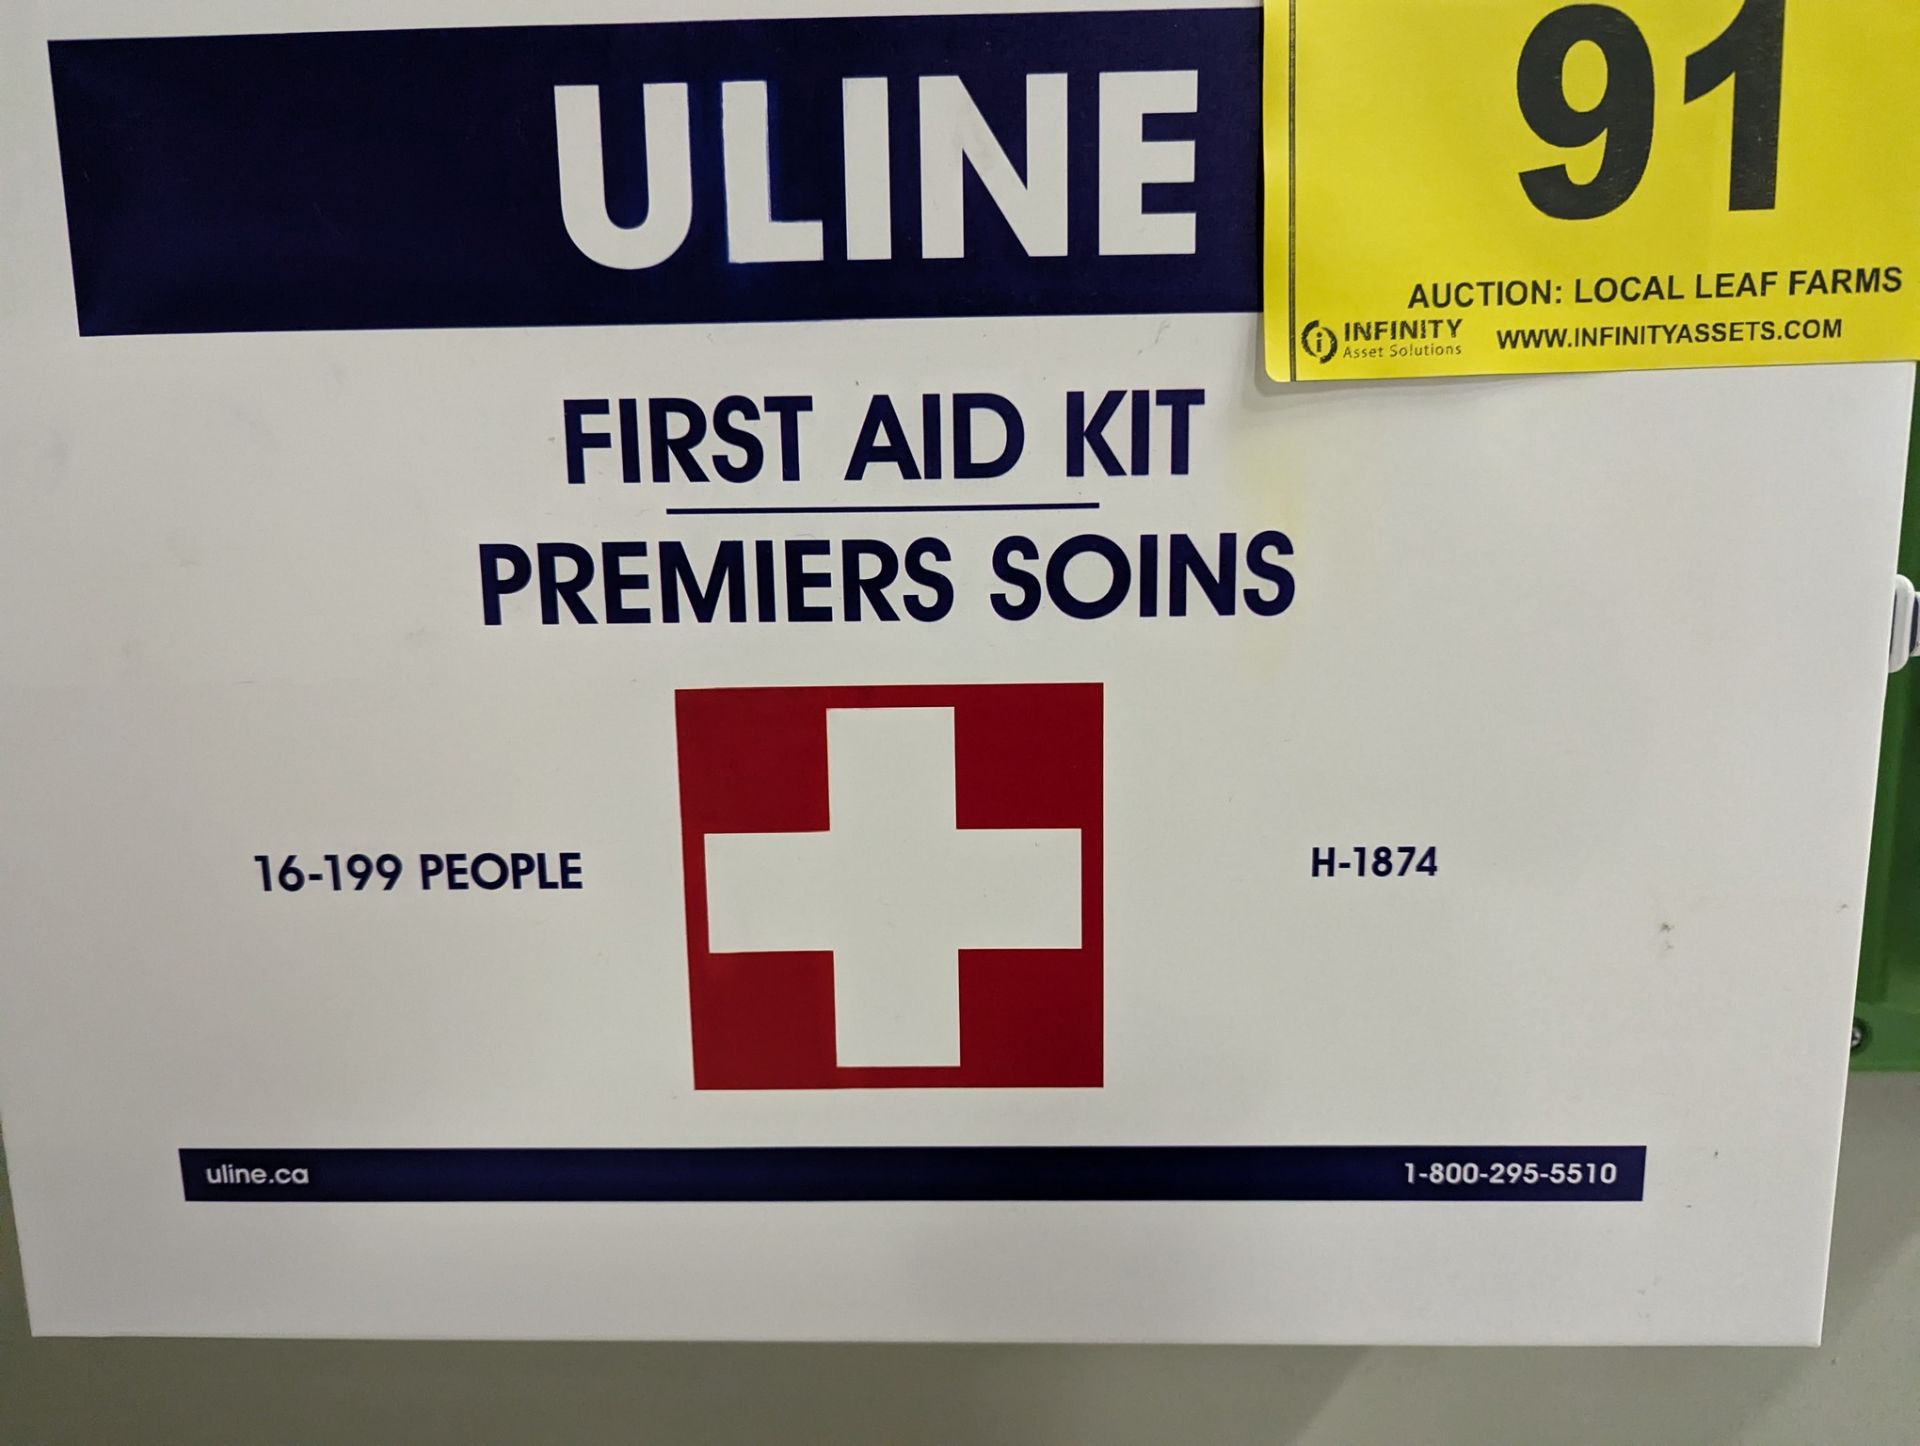 LOT OF ULINE H1874 FIRST AID KIT, ULINE 1876 DELUXE FIRST AID KIT, EYESALINE WALL STATION - Image 2 of 4